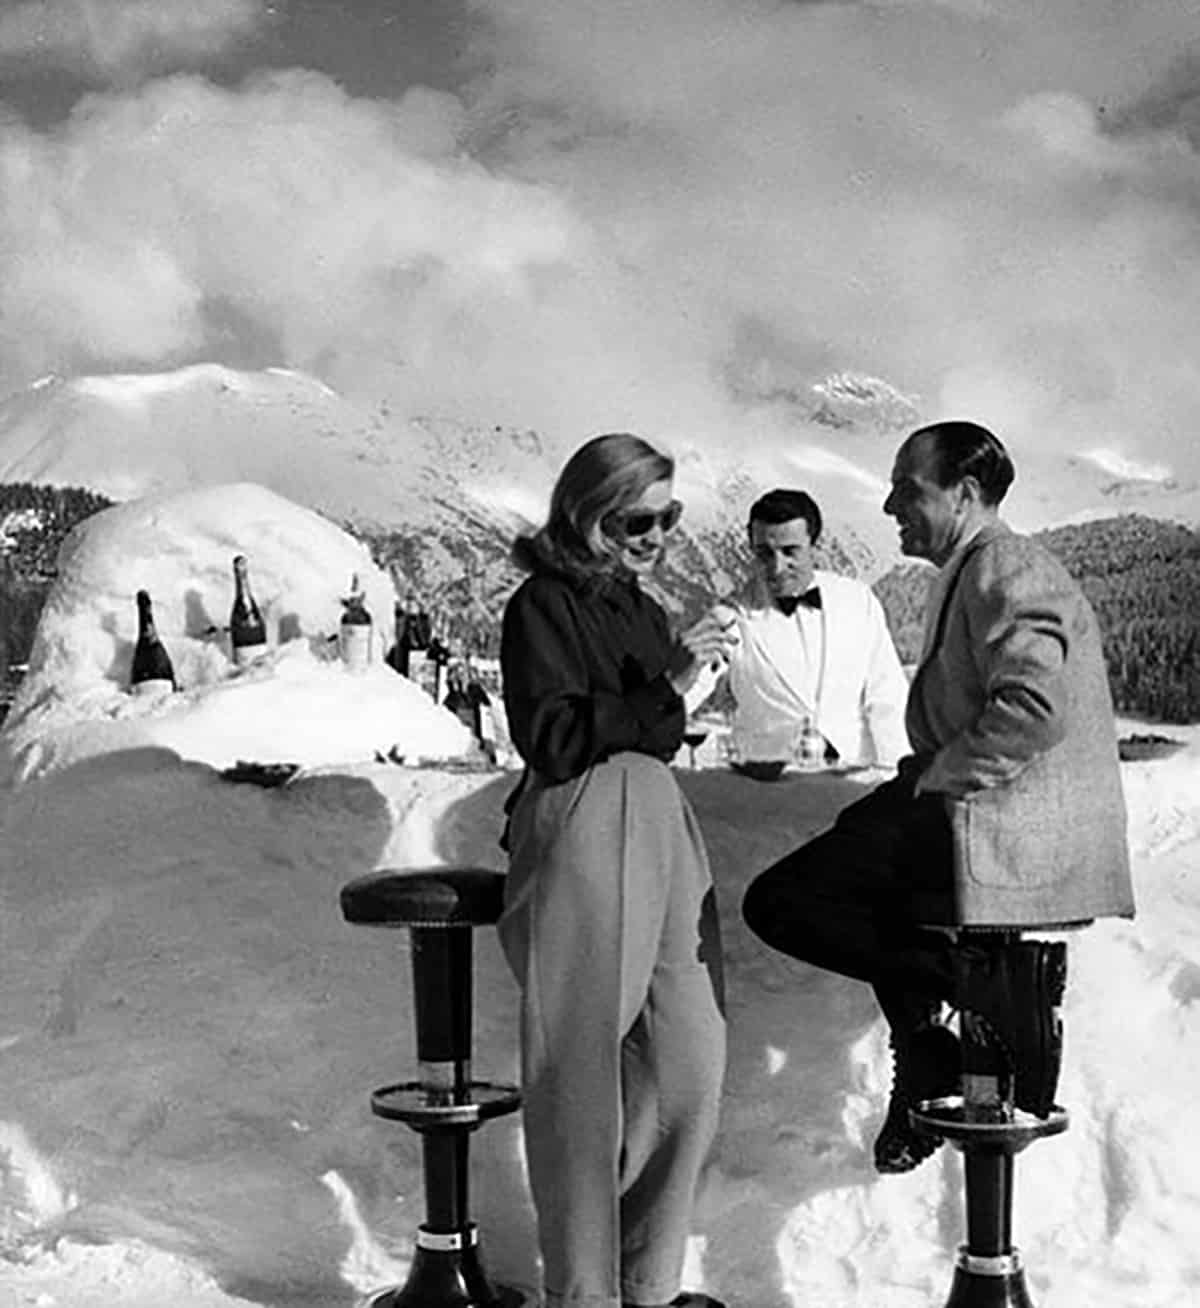 Cocktails on the slopes, 1950s